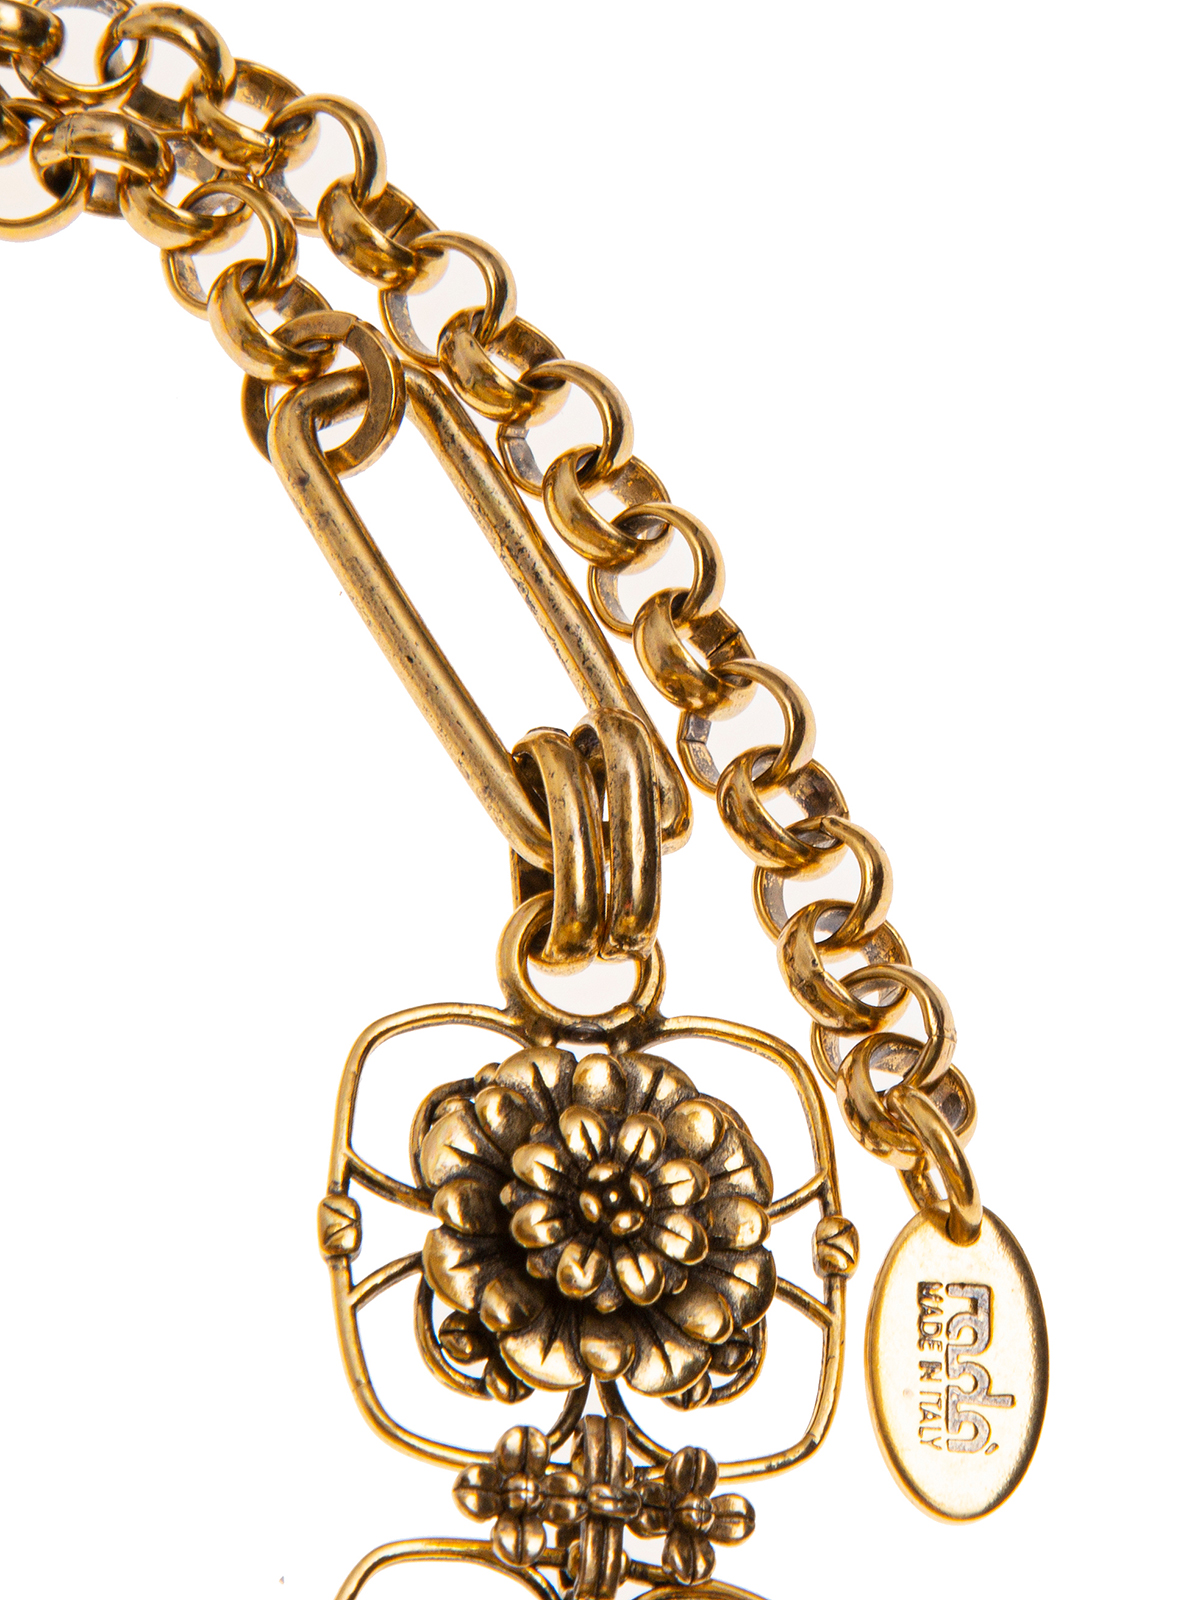 Chain necklace with metal flower decorations